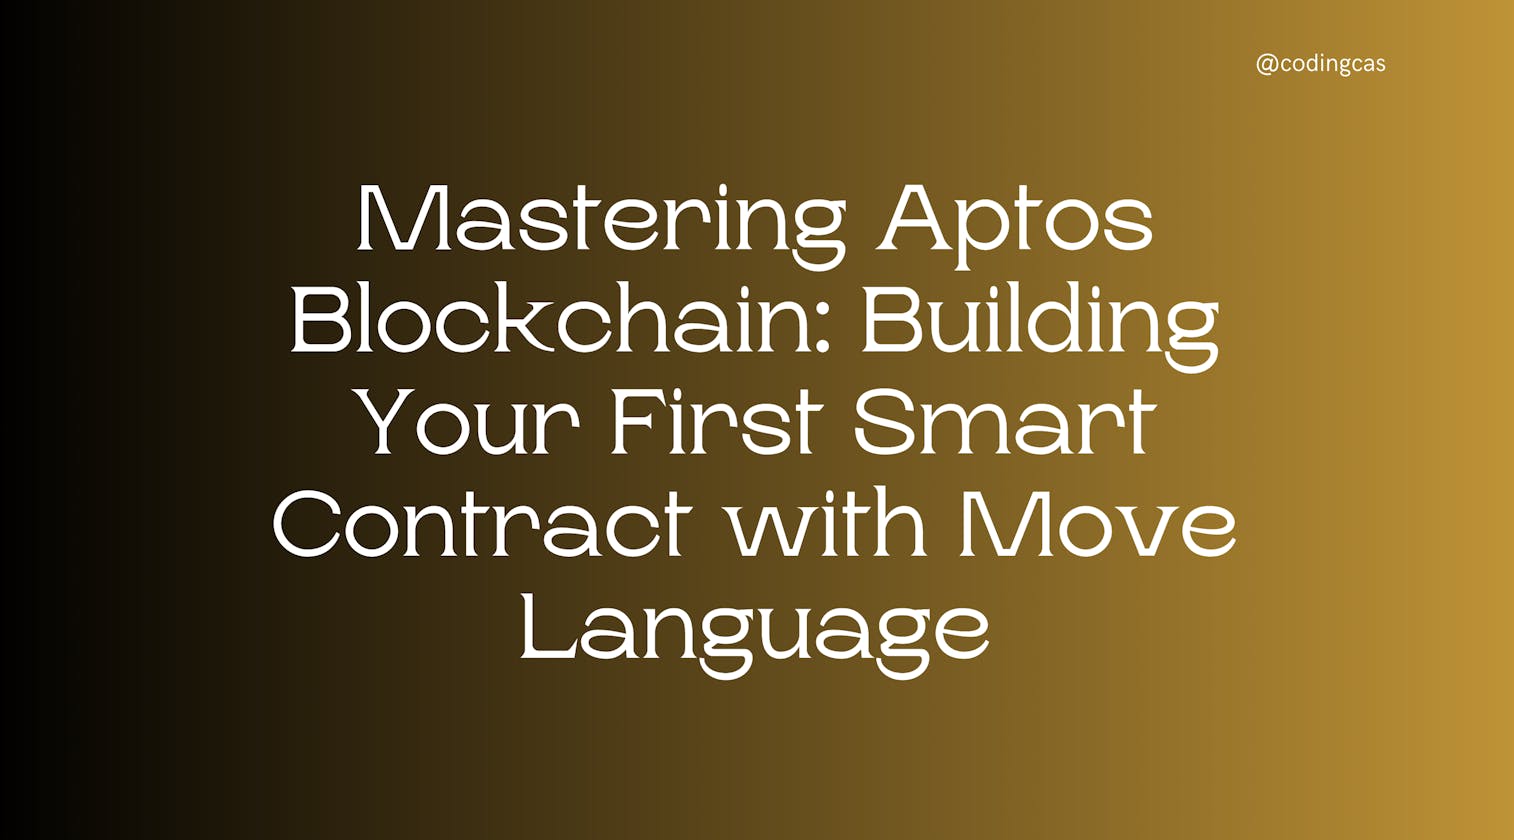 Mastering Aptos Blockchain: Building Your First Smart Contract with Move Language